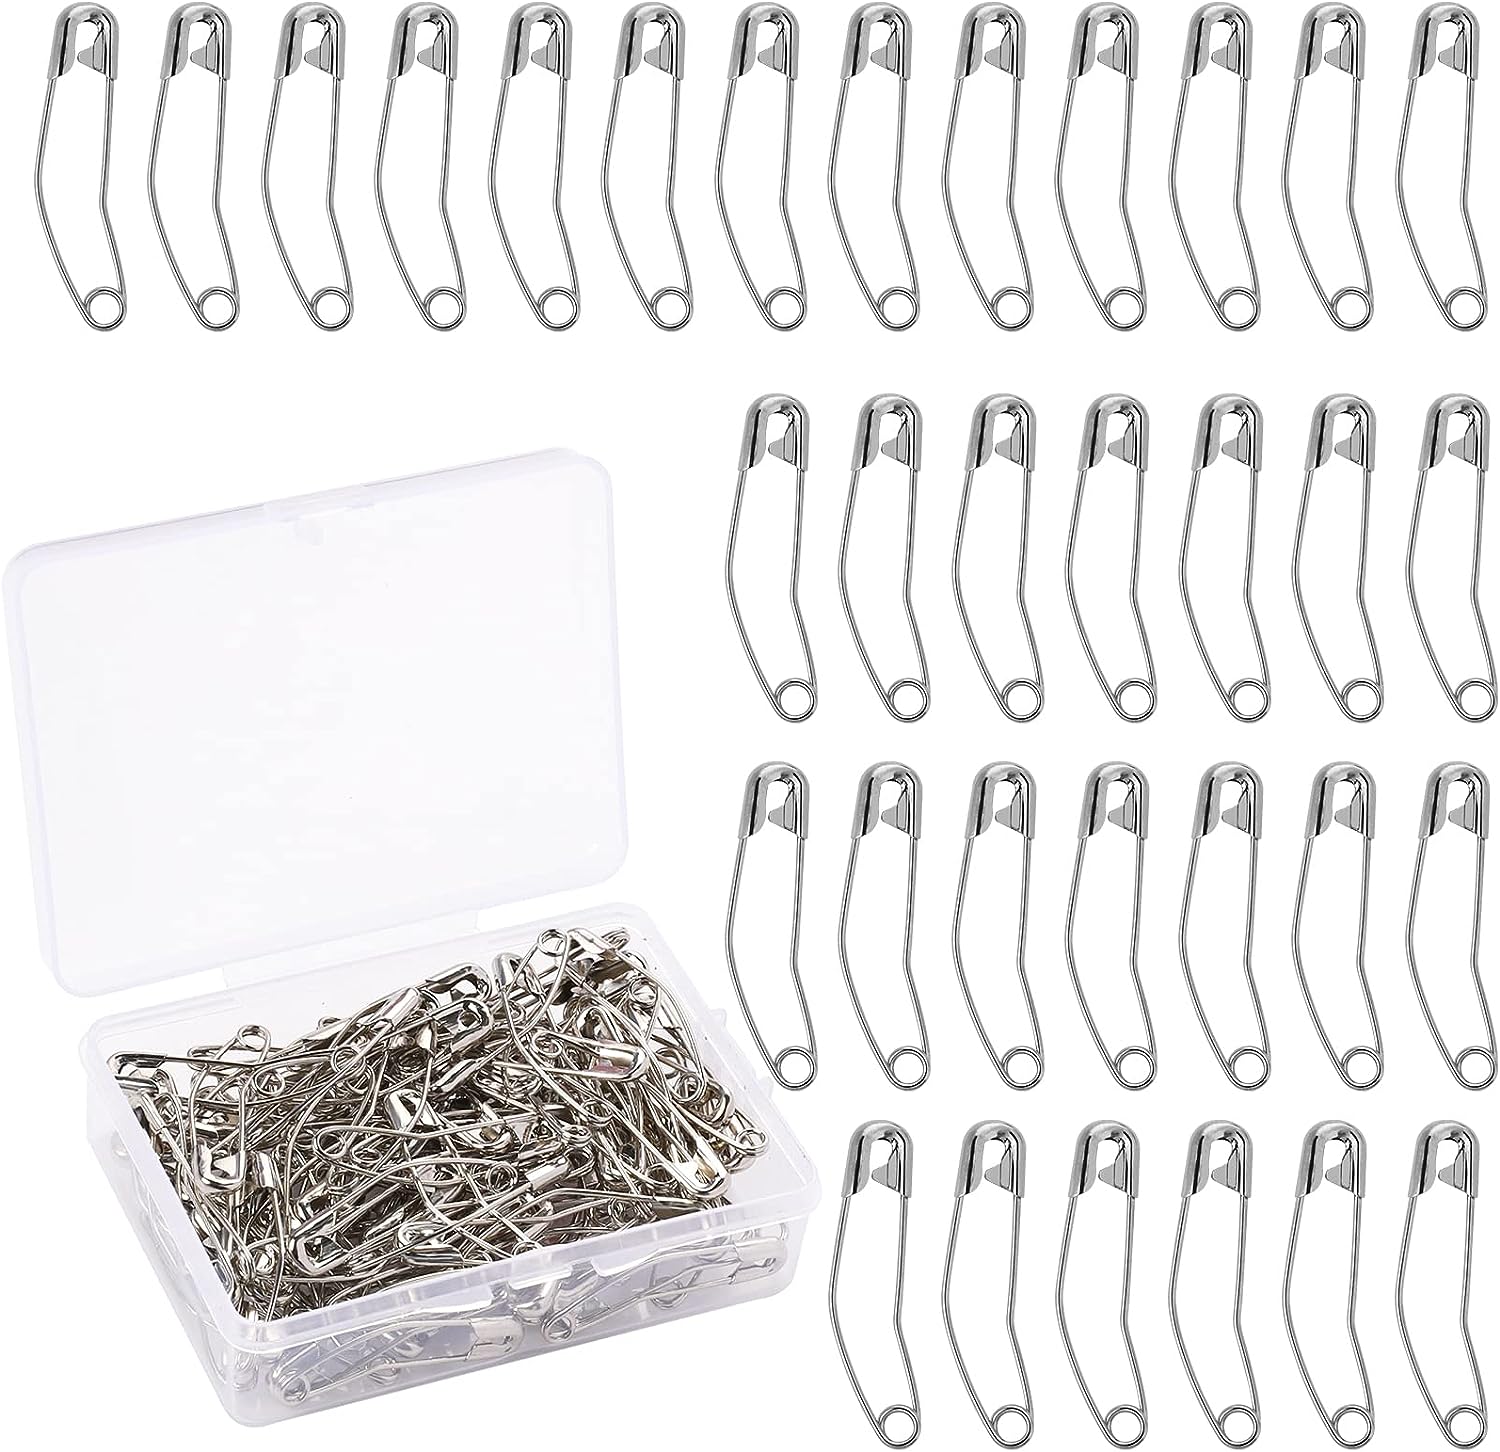 Mr. Pen- Safety Pins, Safety Pins Assorted, 400 Pack, Black, Assorted Safety Pins, Safety Pin, Small Safety Pins, Size: Large